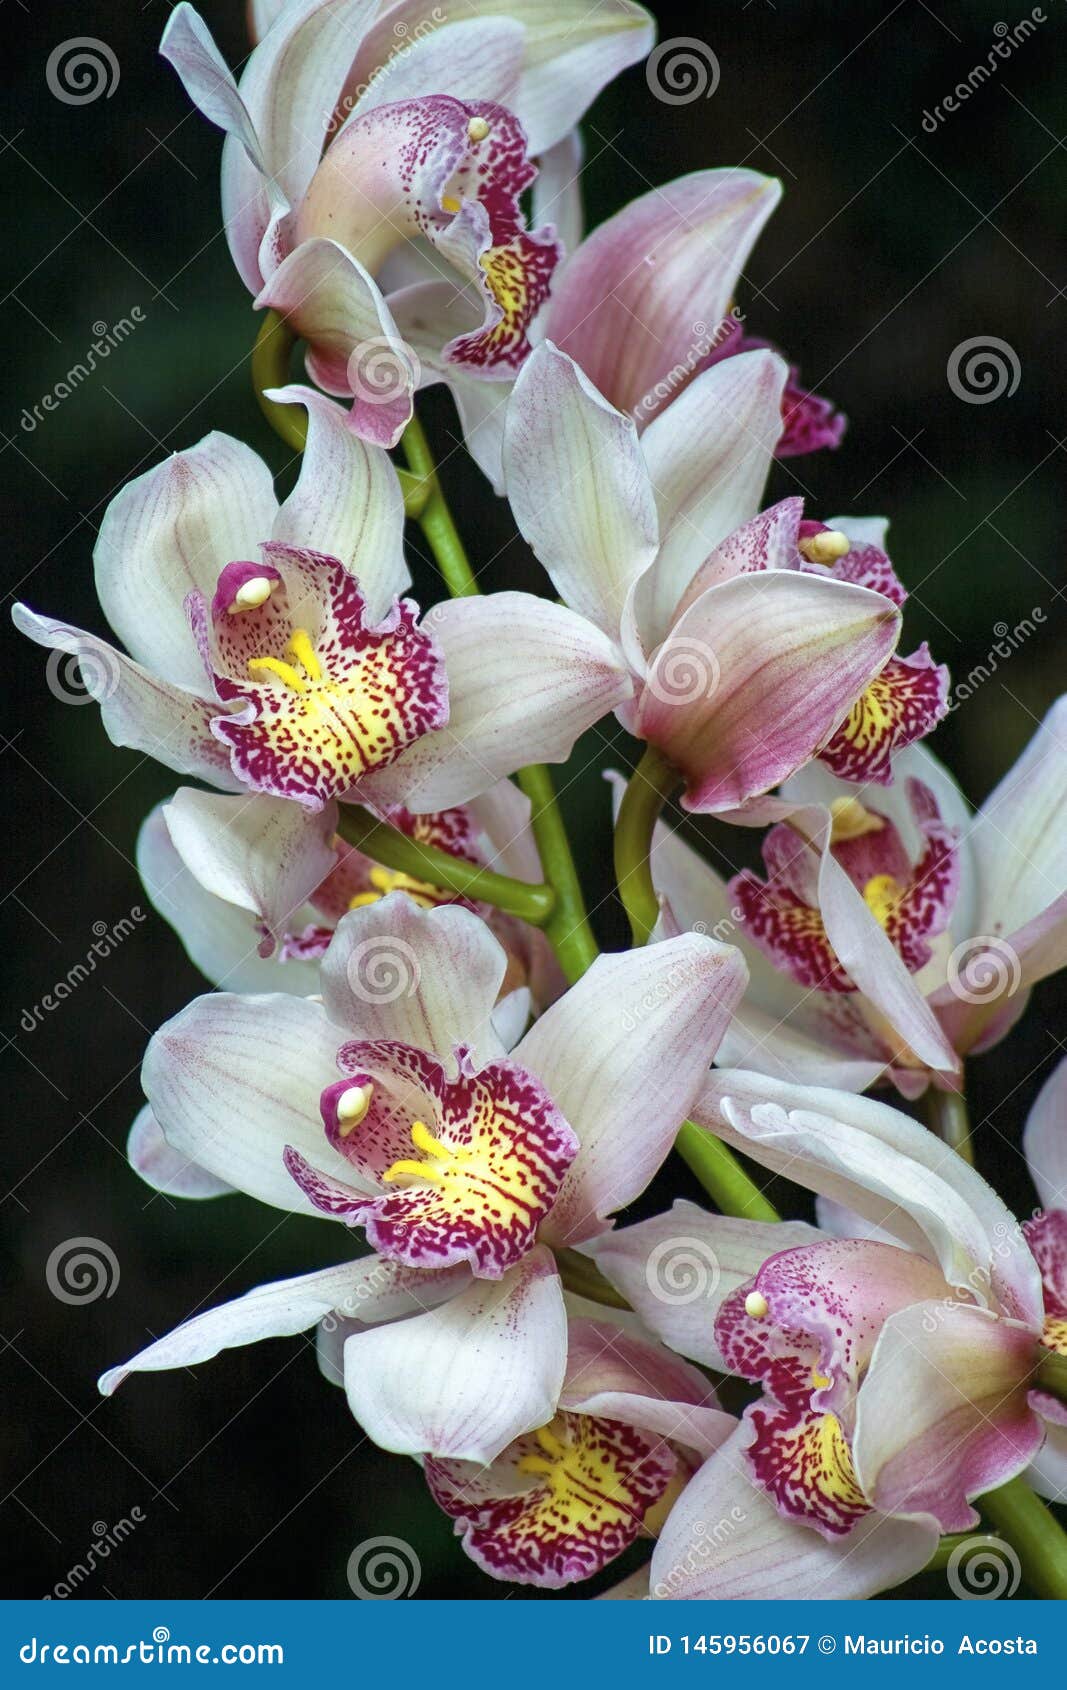 Bouquet Of White Dendrobium Orchid Flowers Stock Image Image Of Flower Bouquet 145956067